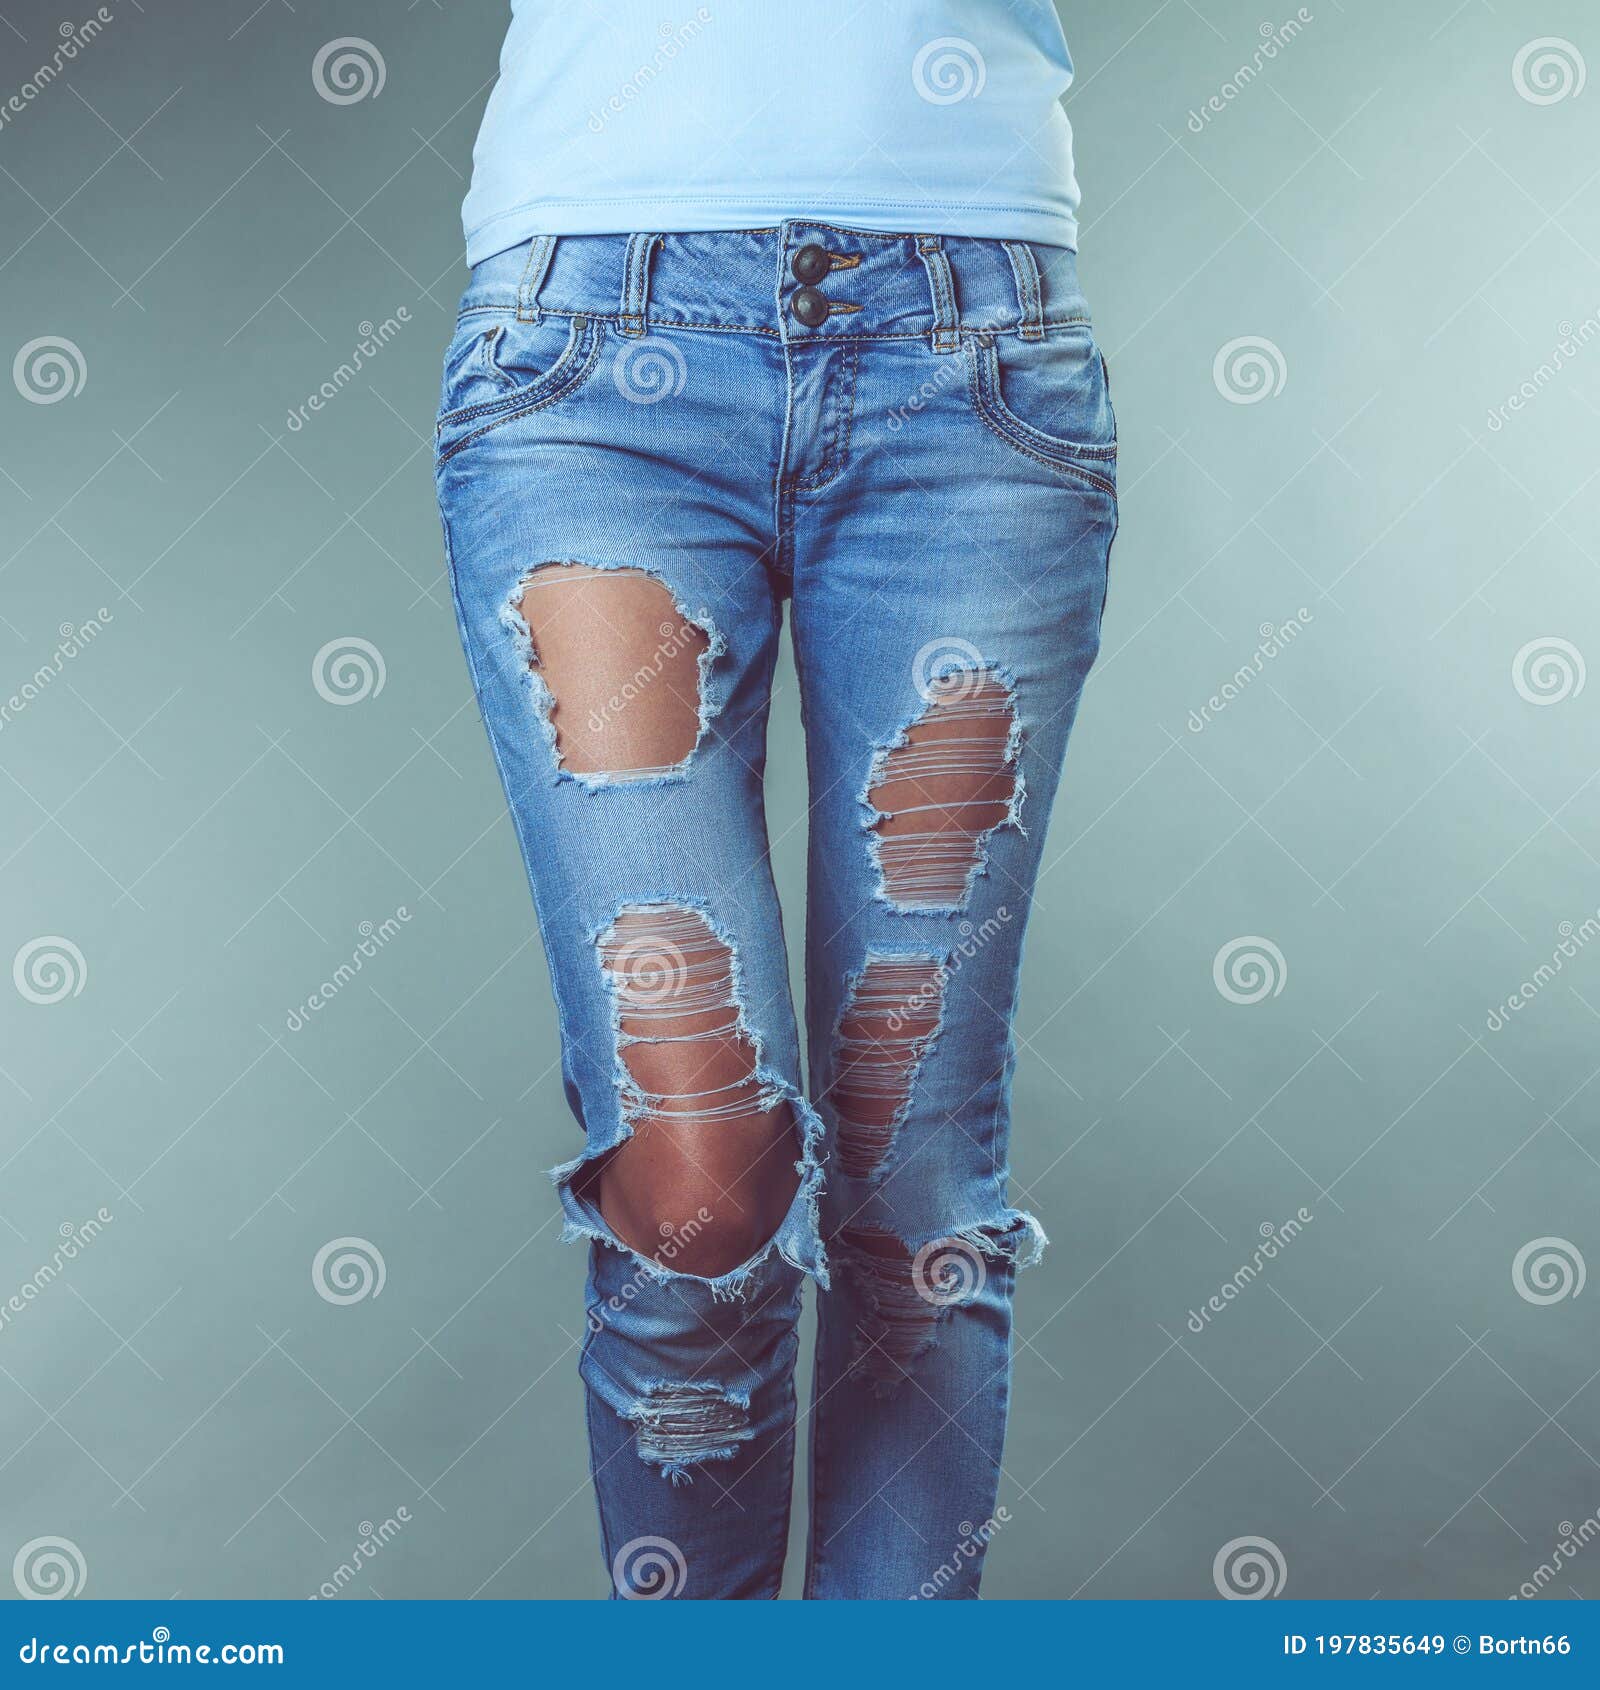 Female legs in torn jeans stock image. Image of legs - 197835649